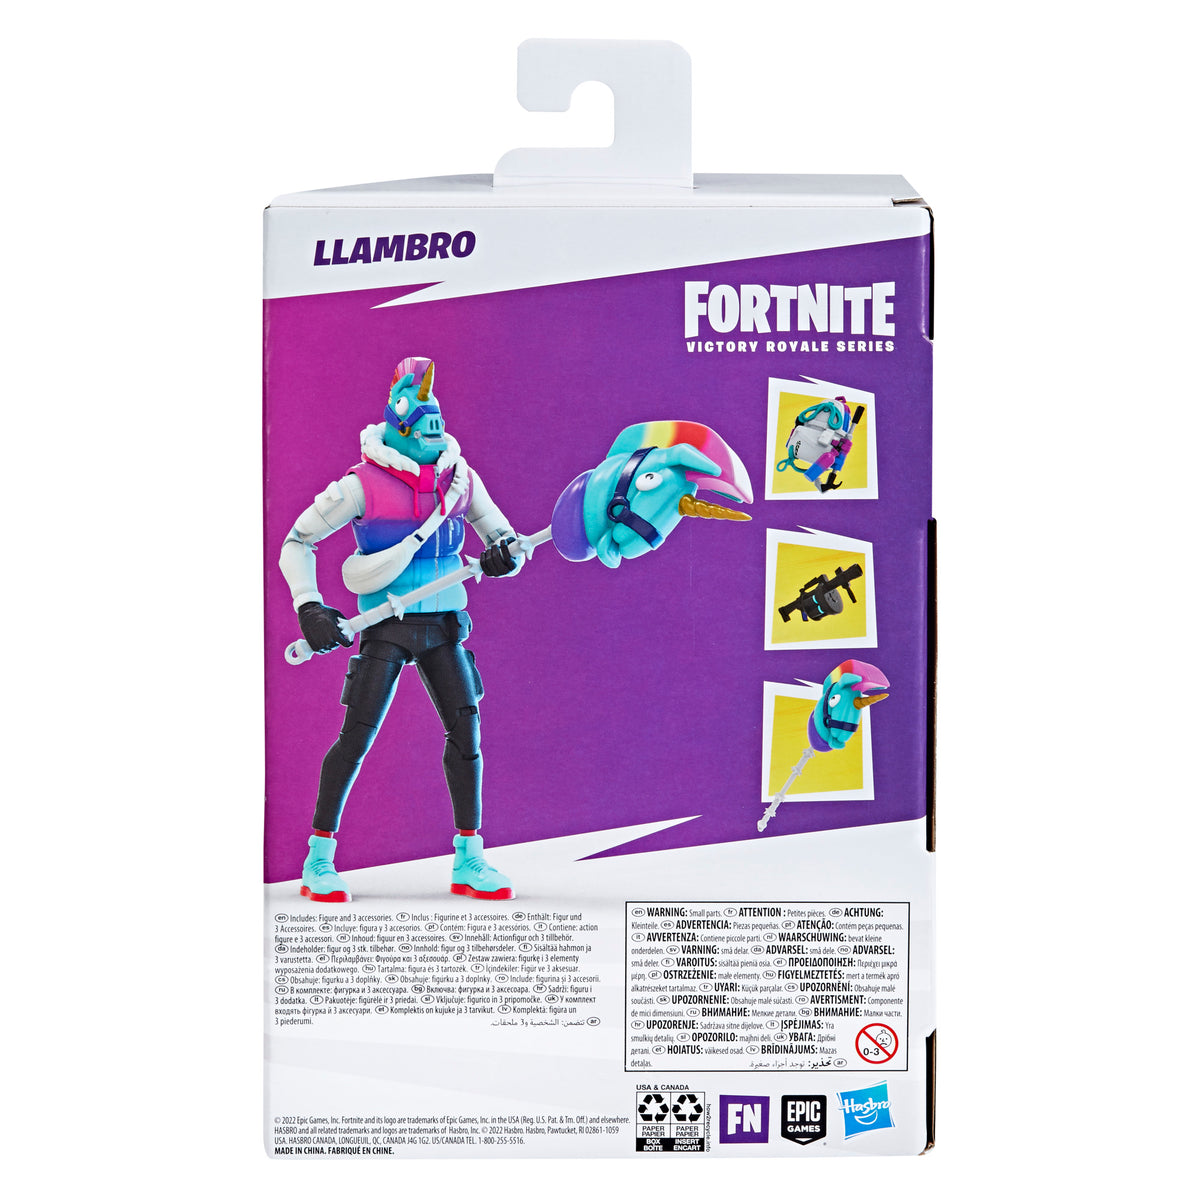 Fortnite guide: the best gaming accessories for victory royales